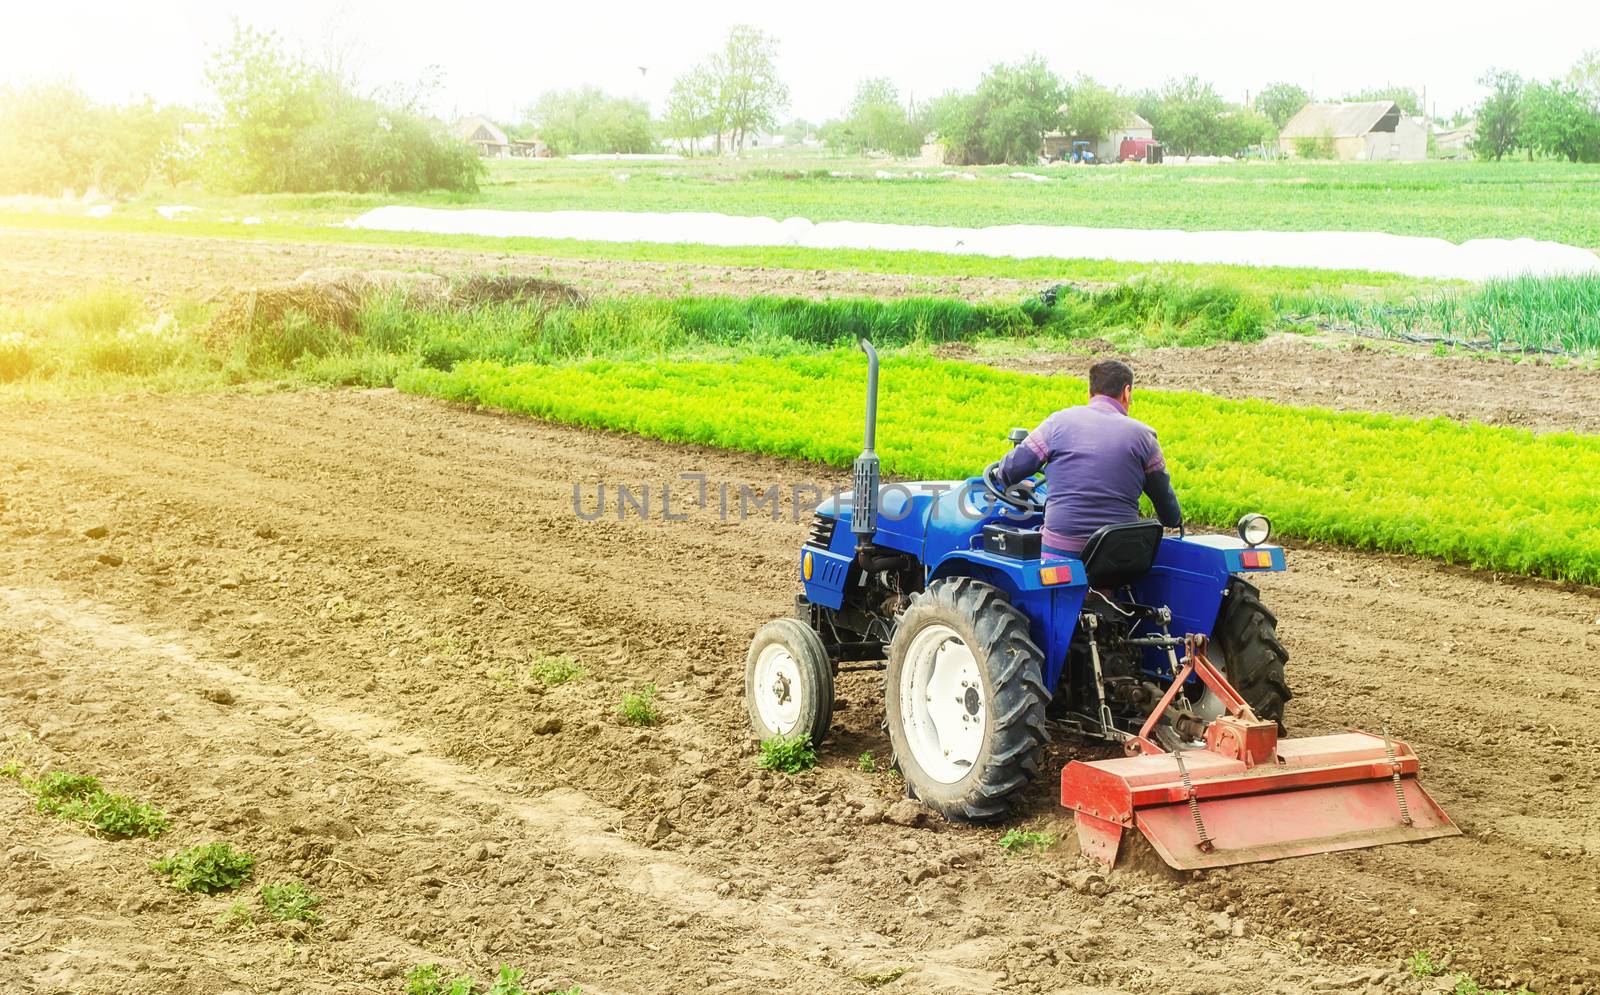 Farmer on a tractor with milling machine loosens, grinds and mixes soil. Loosening the surface, cultivating the land for further planting. Cultivation technology equipment. Farming and agriculture.